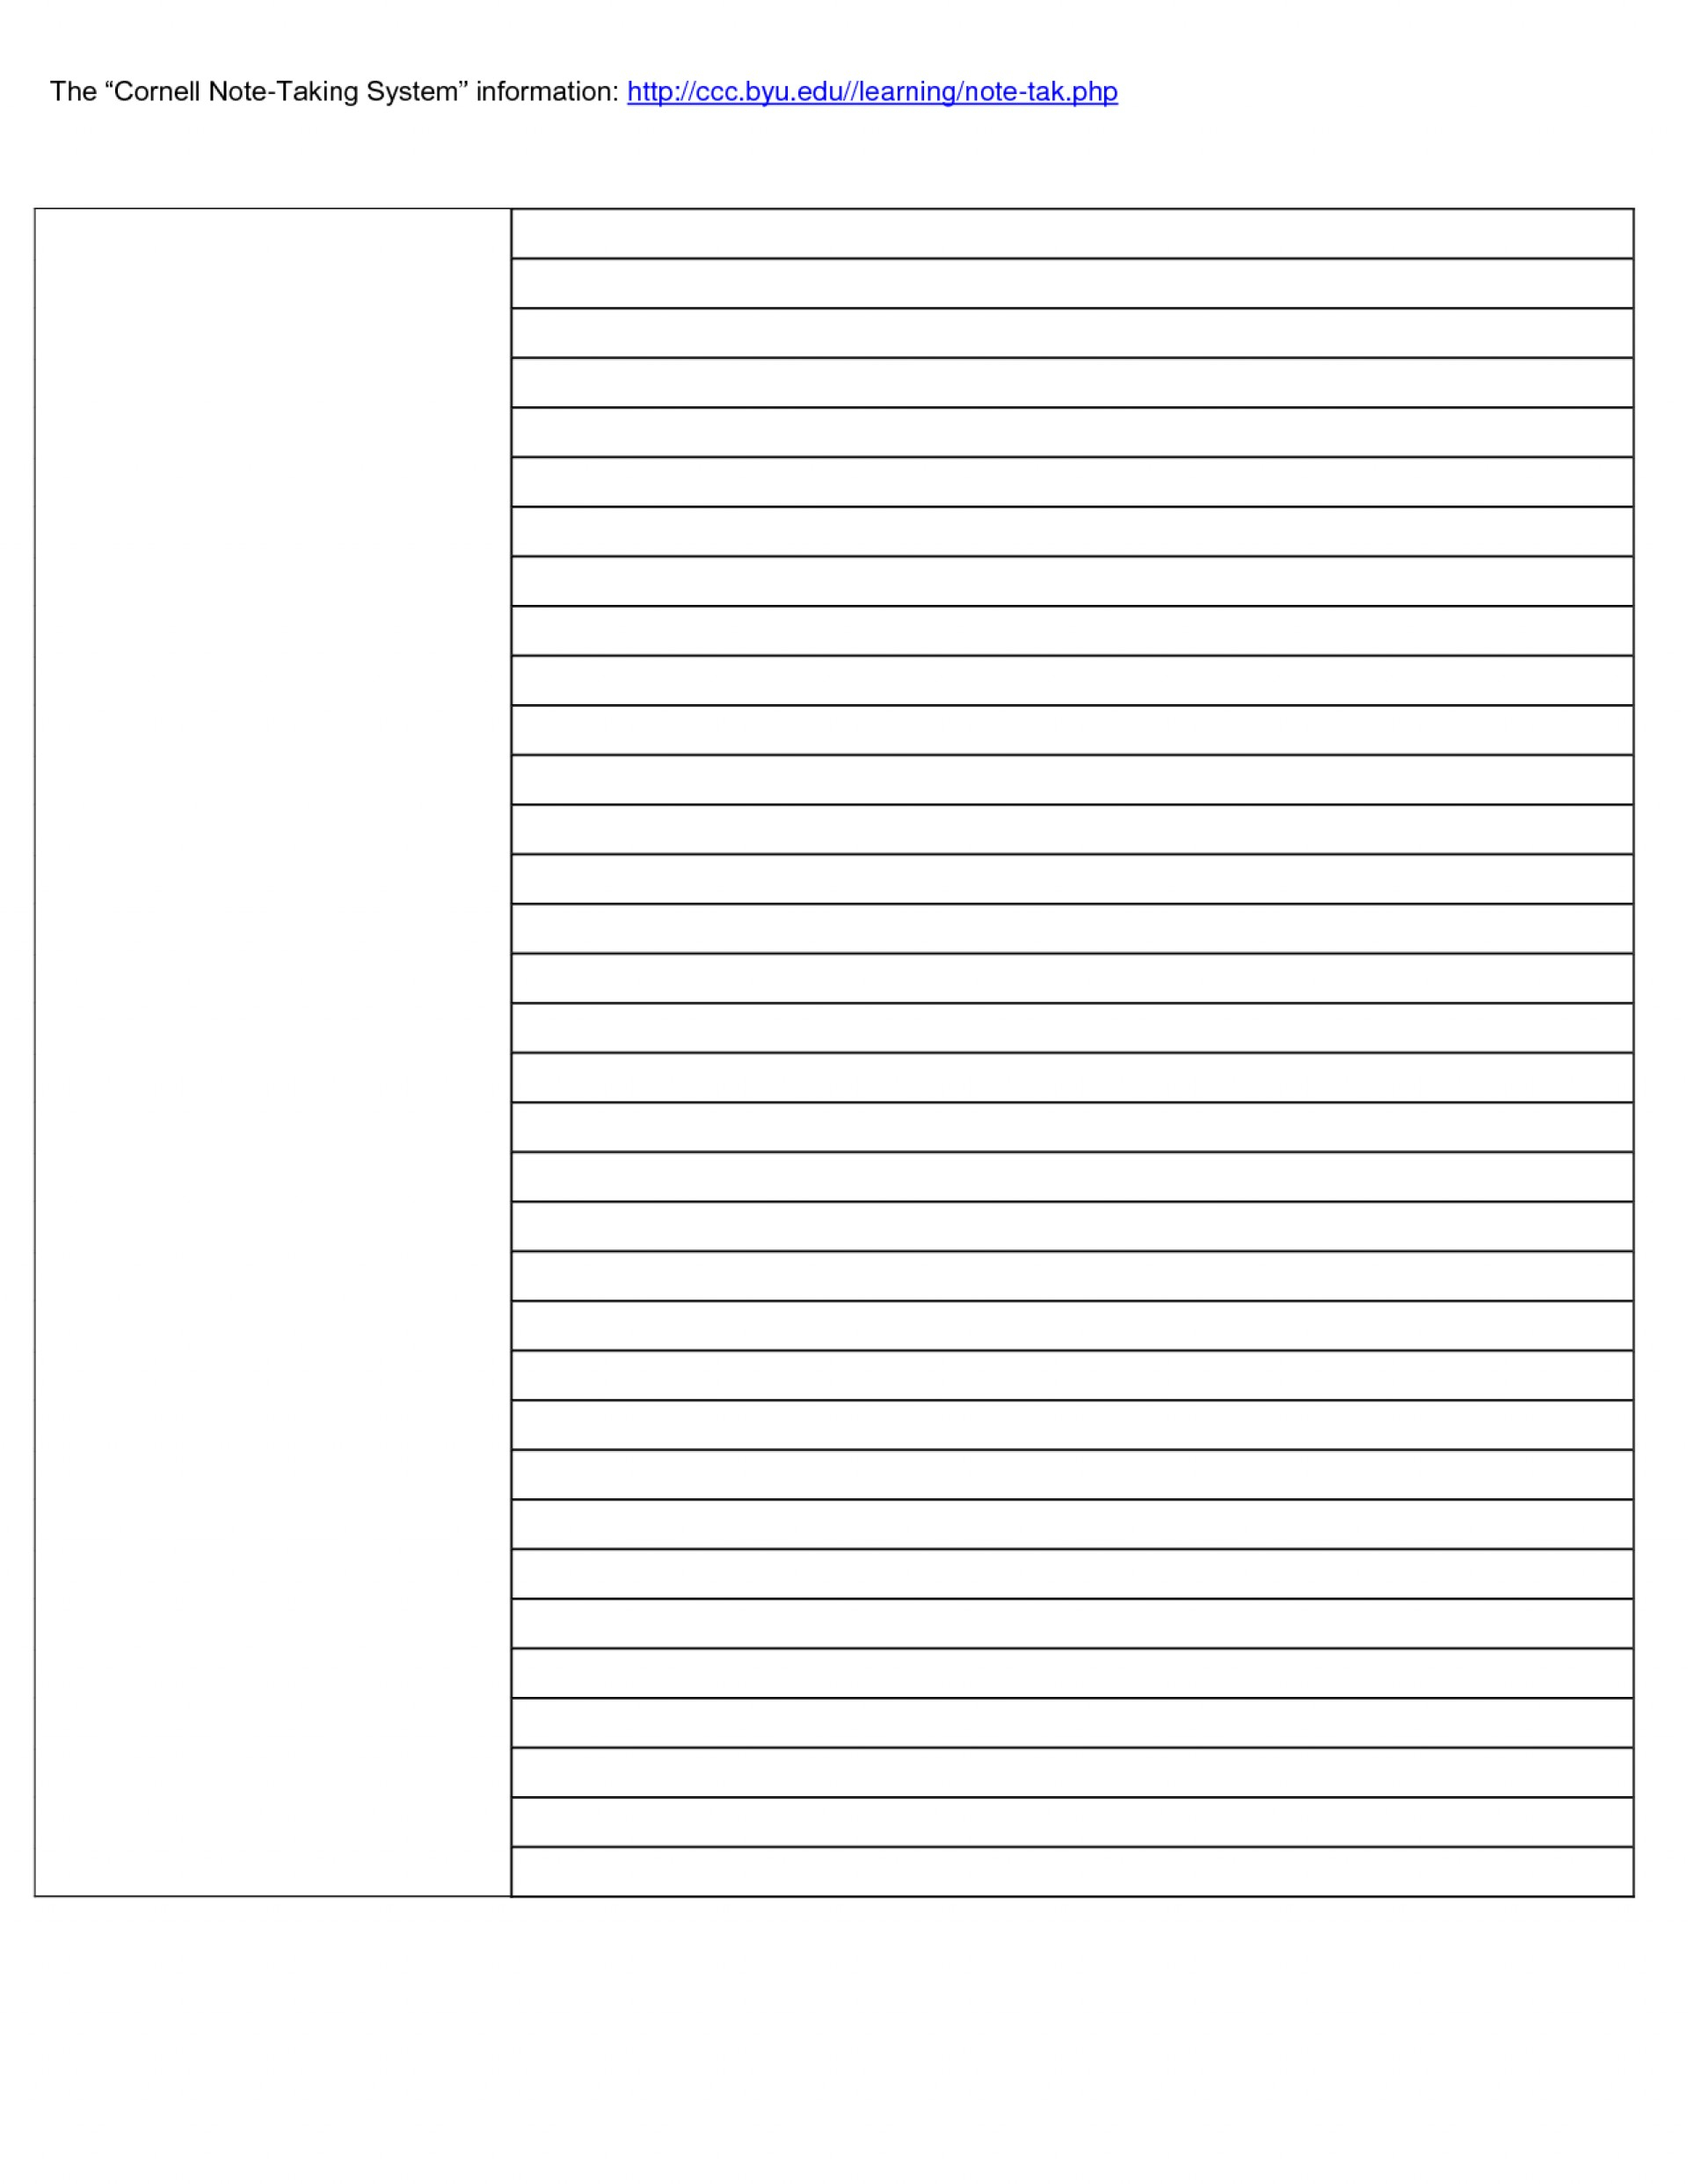 005 Note Taking Template Word Ideas Unforgettable Cornell For Cornell Note Template Word